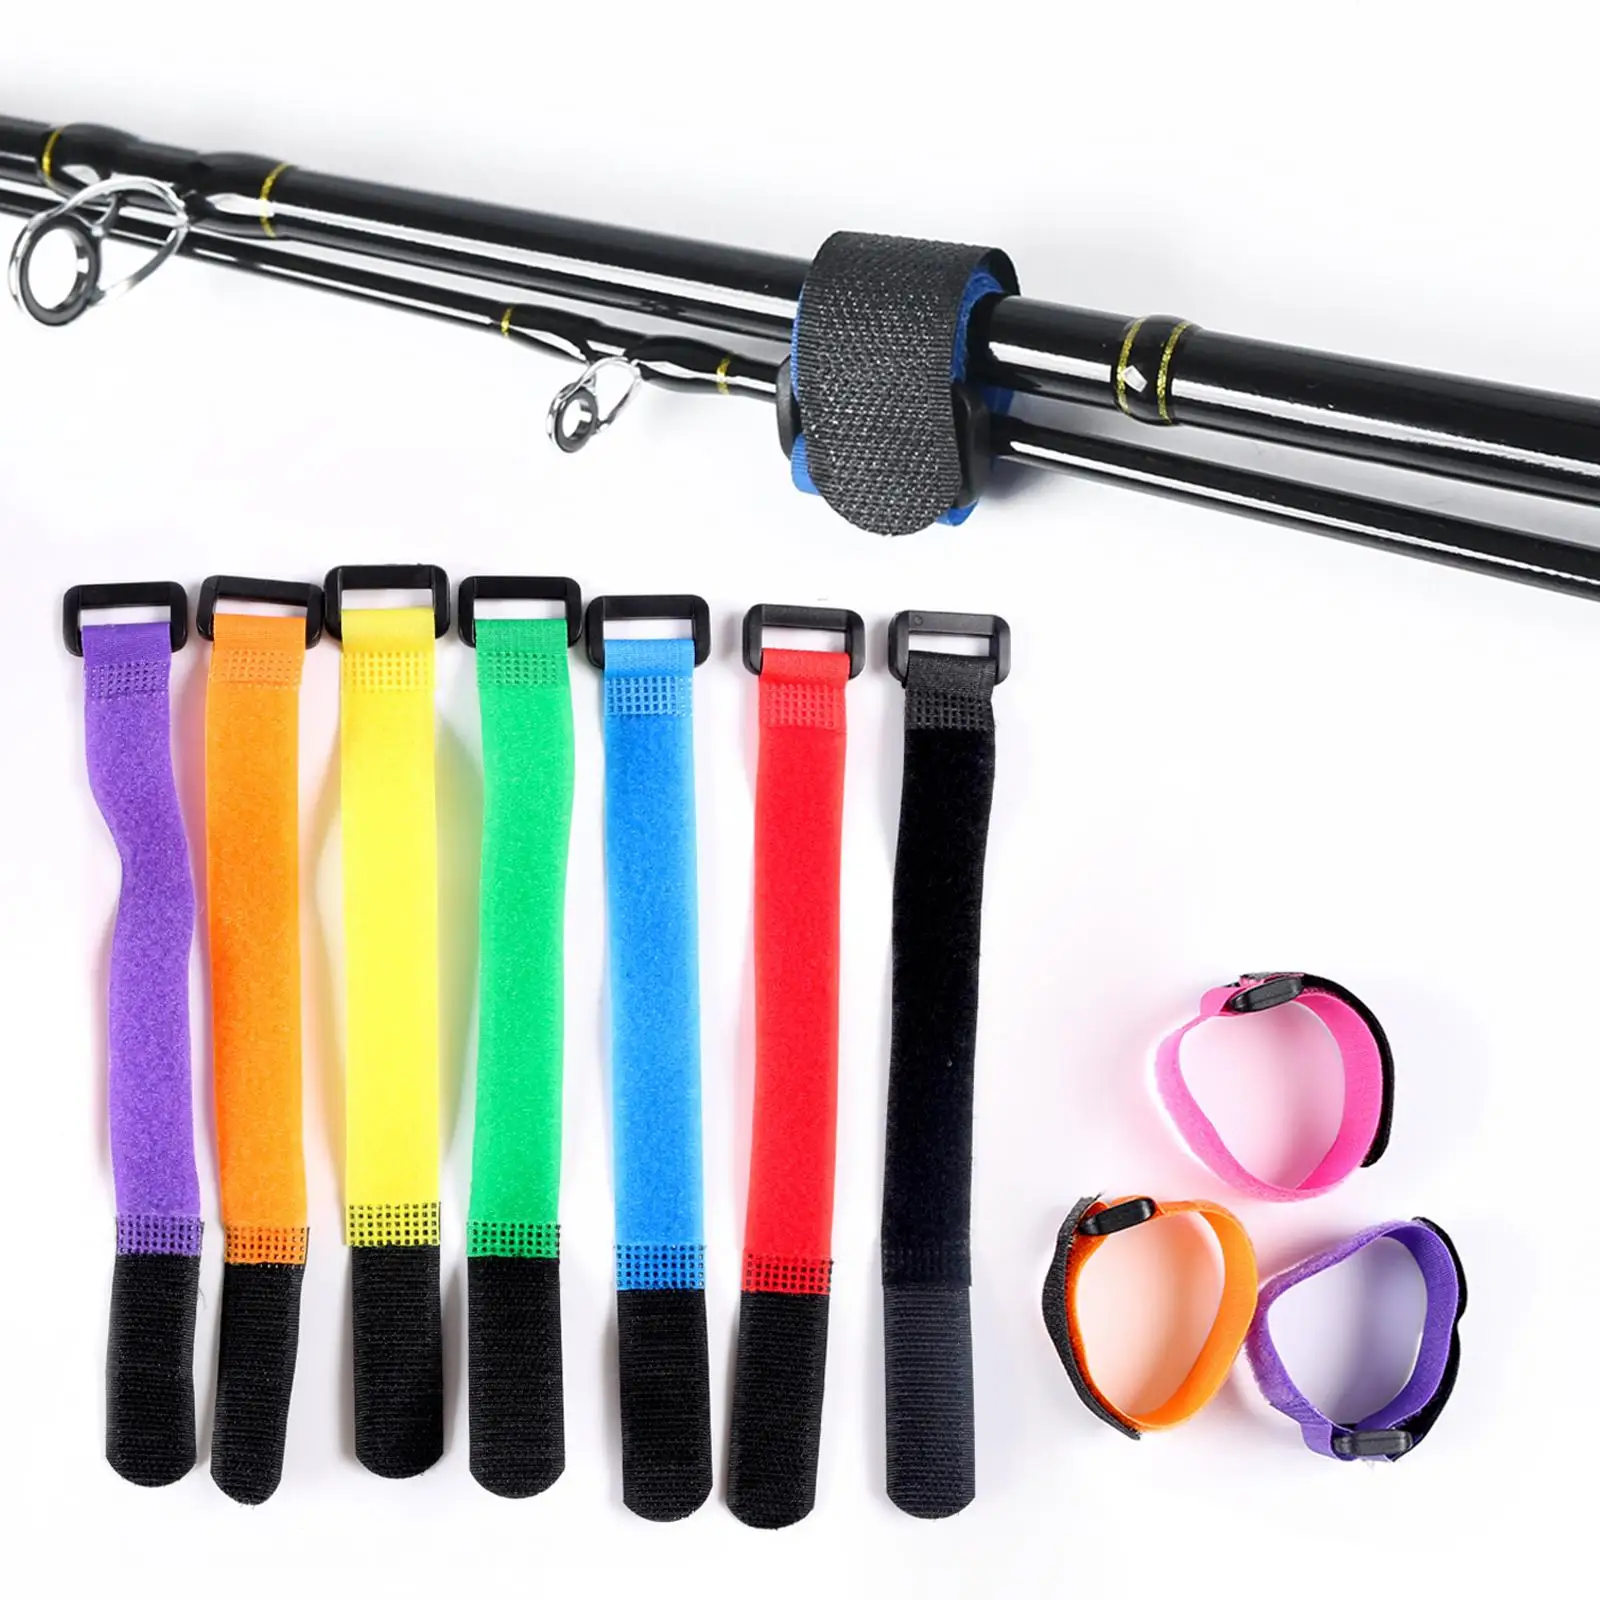 10Pcs Fishing Rod Tie Holders Multicolor Reusable Securing Cord Nylon Wire Ties Hook Fastener for Hoses Pant Garters Bike Office